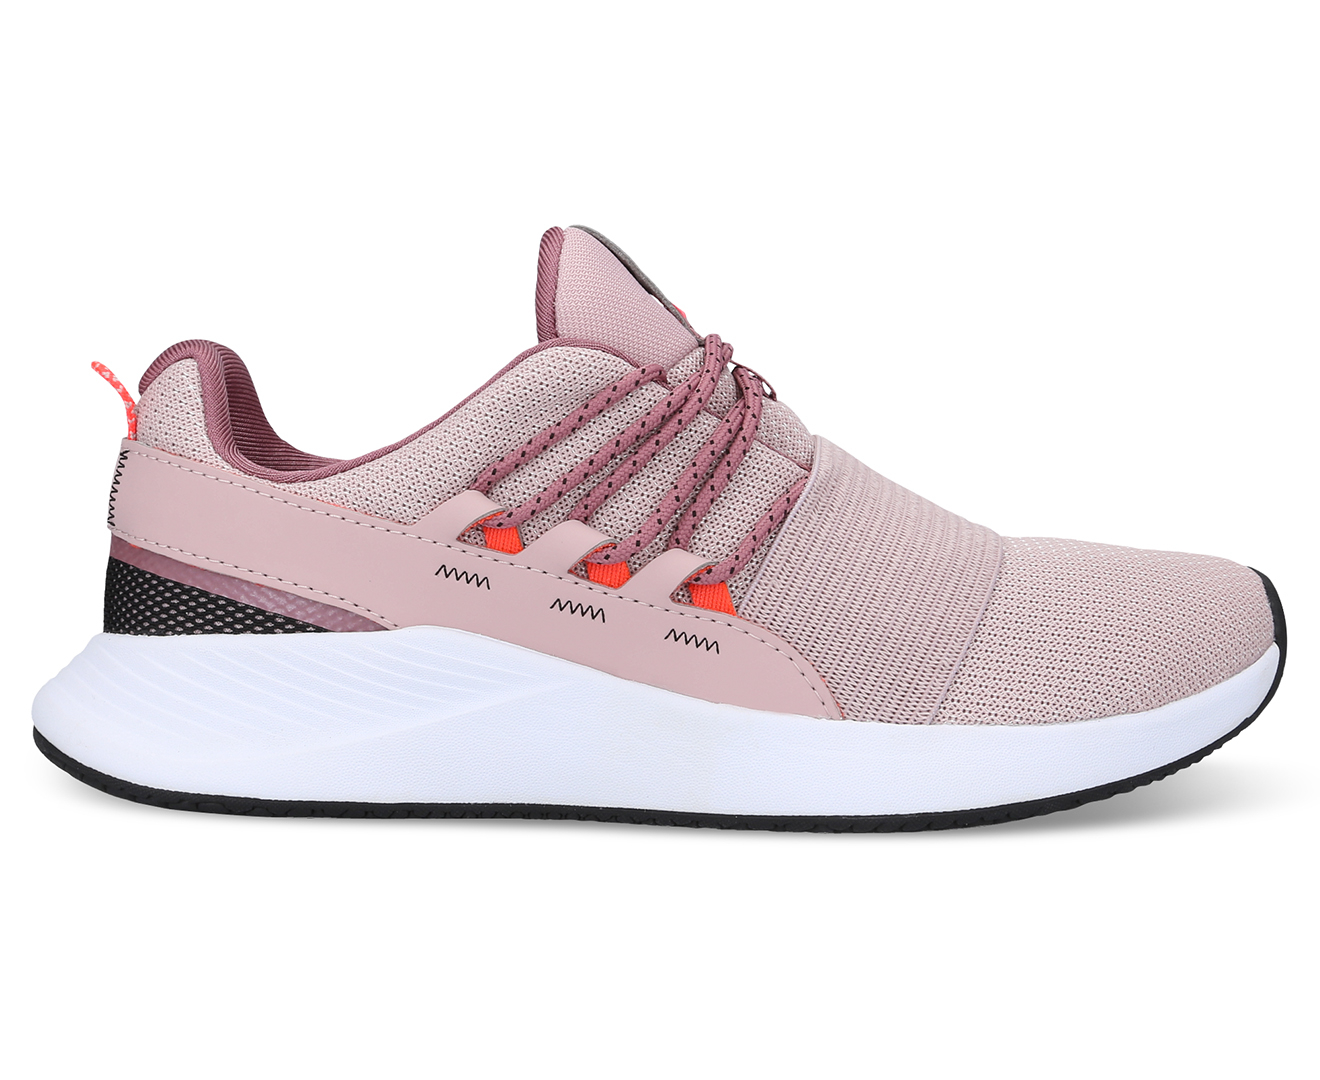 Under Armour Women's UA Charged Breathe Lace Sportstyle Shoes - Pink ...